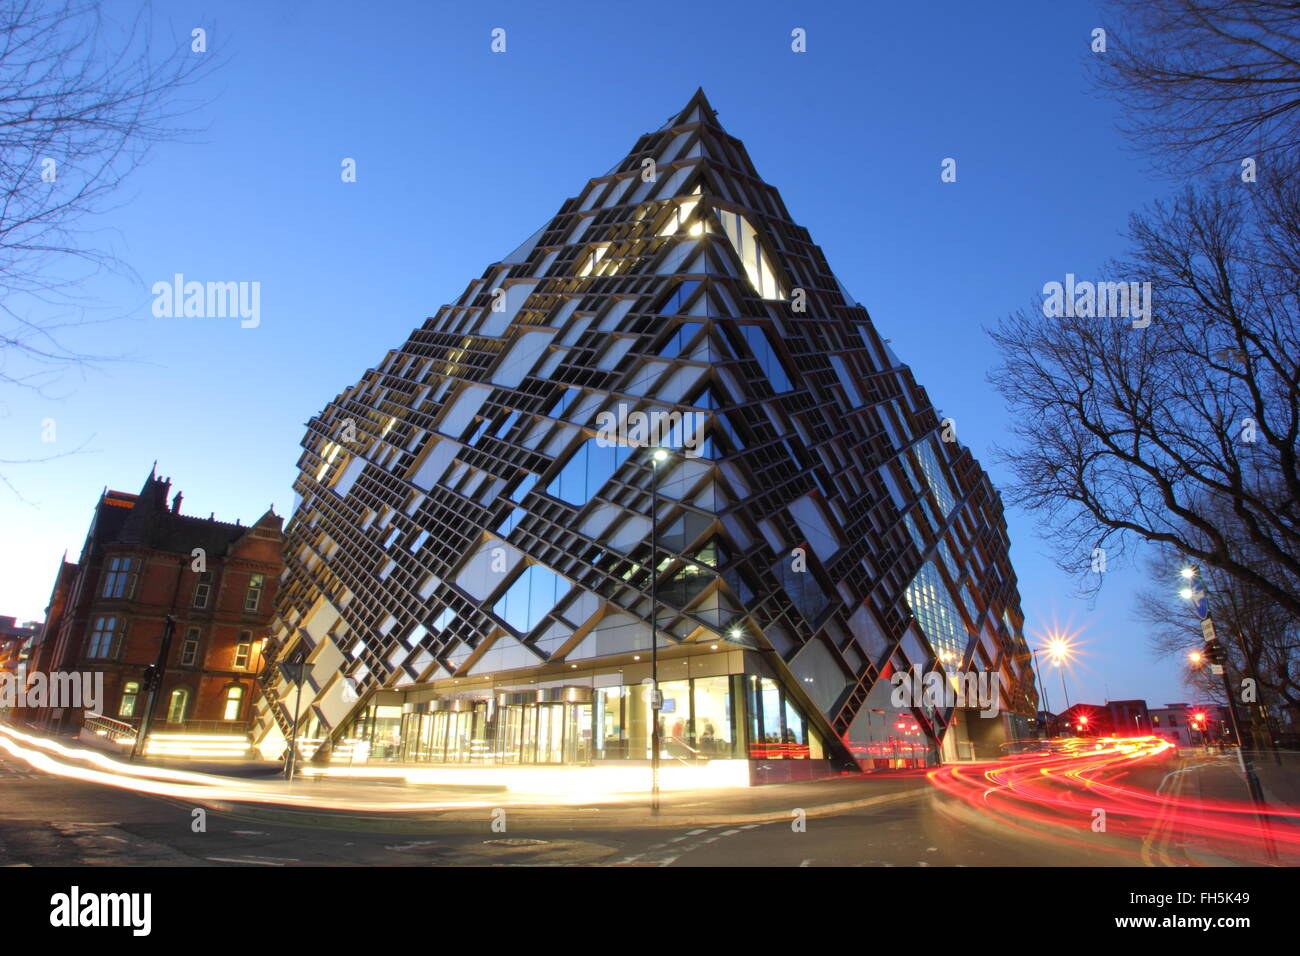 Sheffield Yorkshire UK 2016.The Diamond building on Leavygreave Road in the centre of the City of Sheffield - 2016 Stock Photo